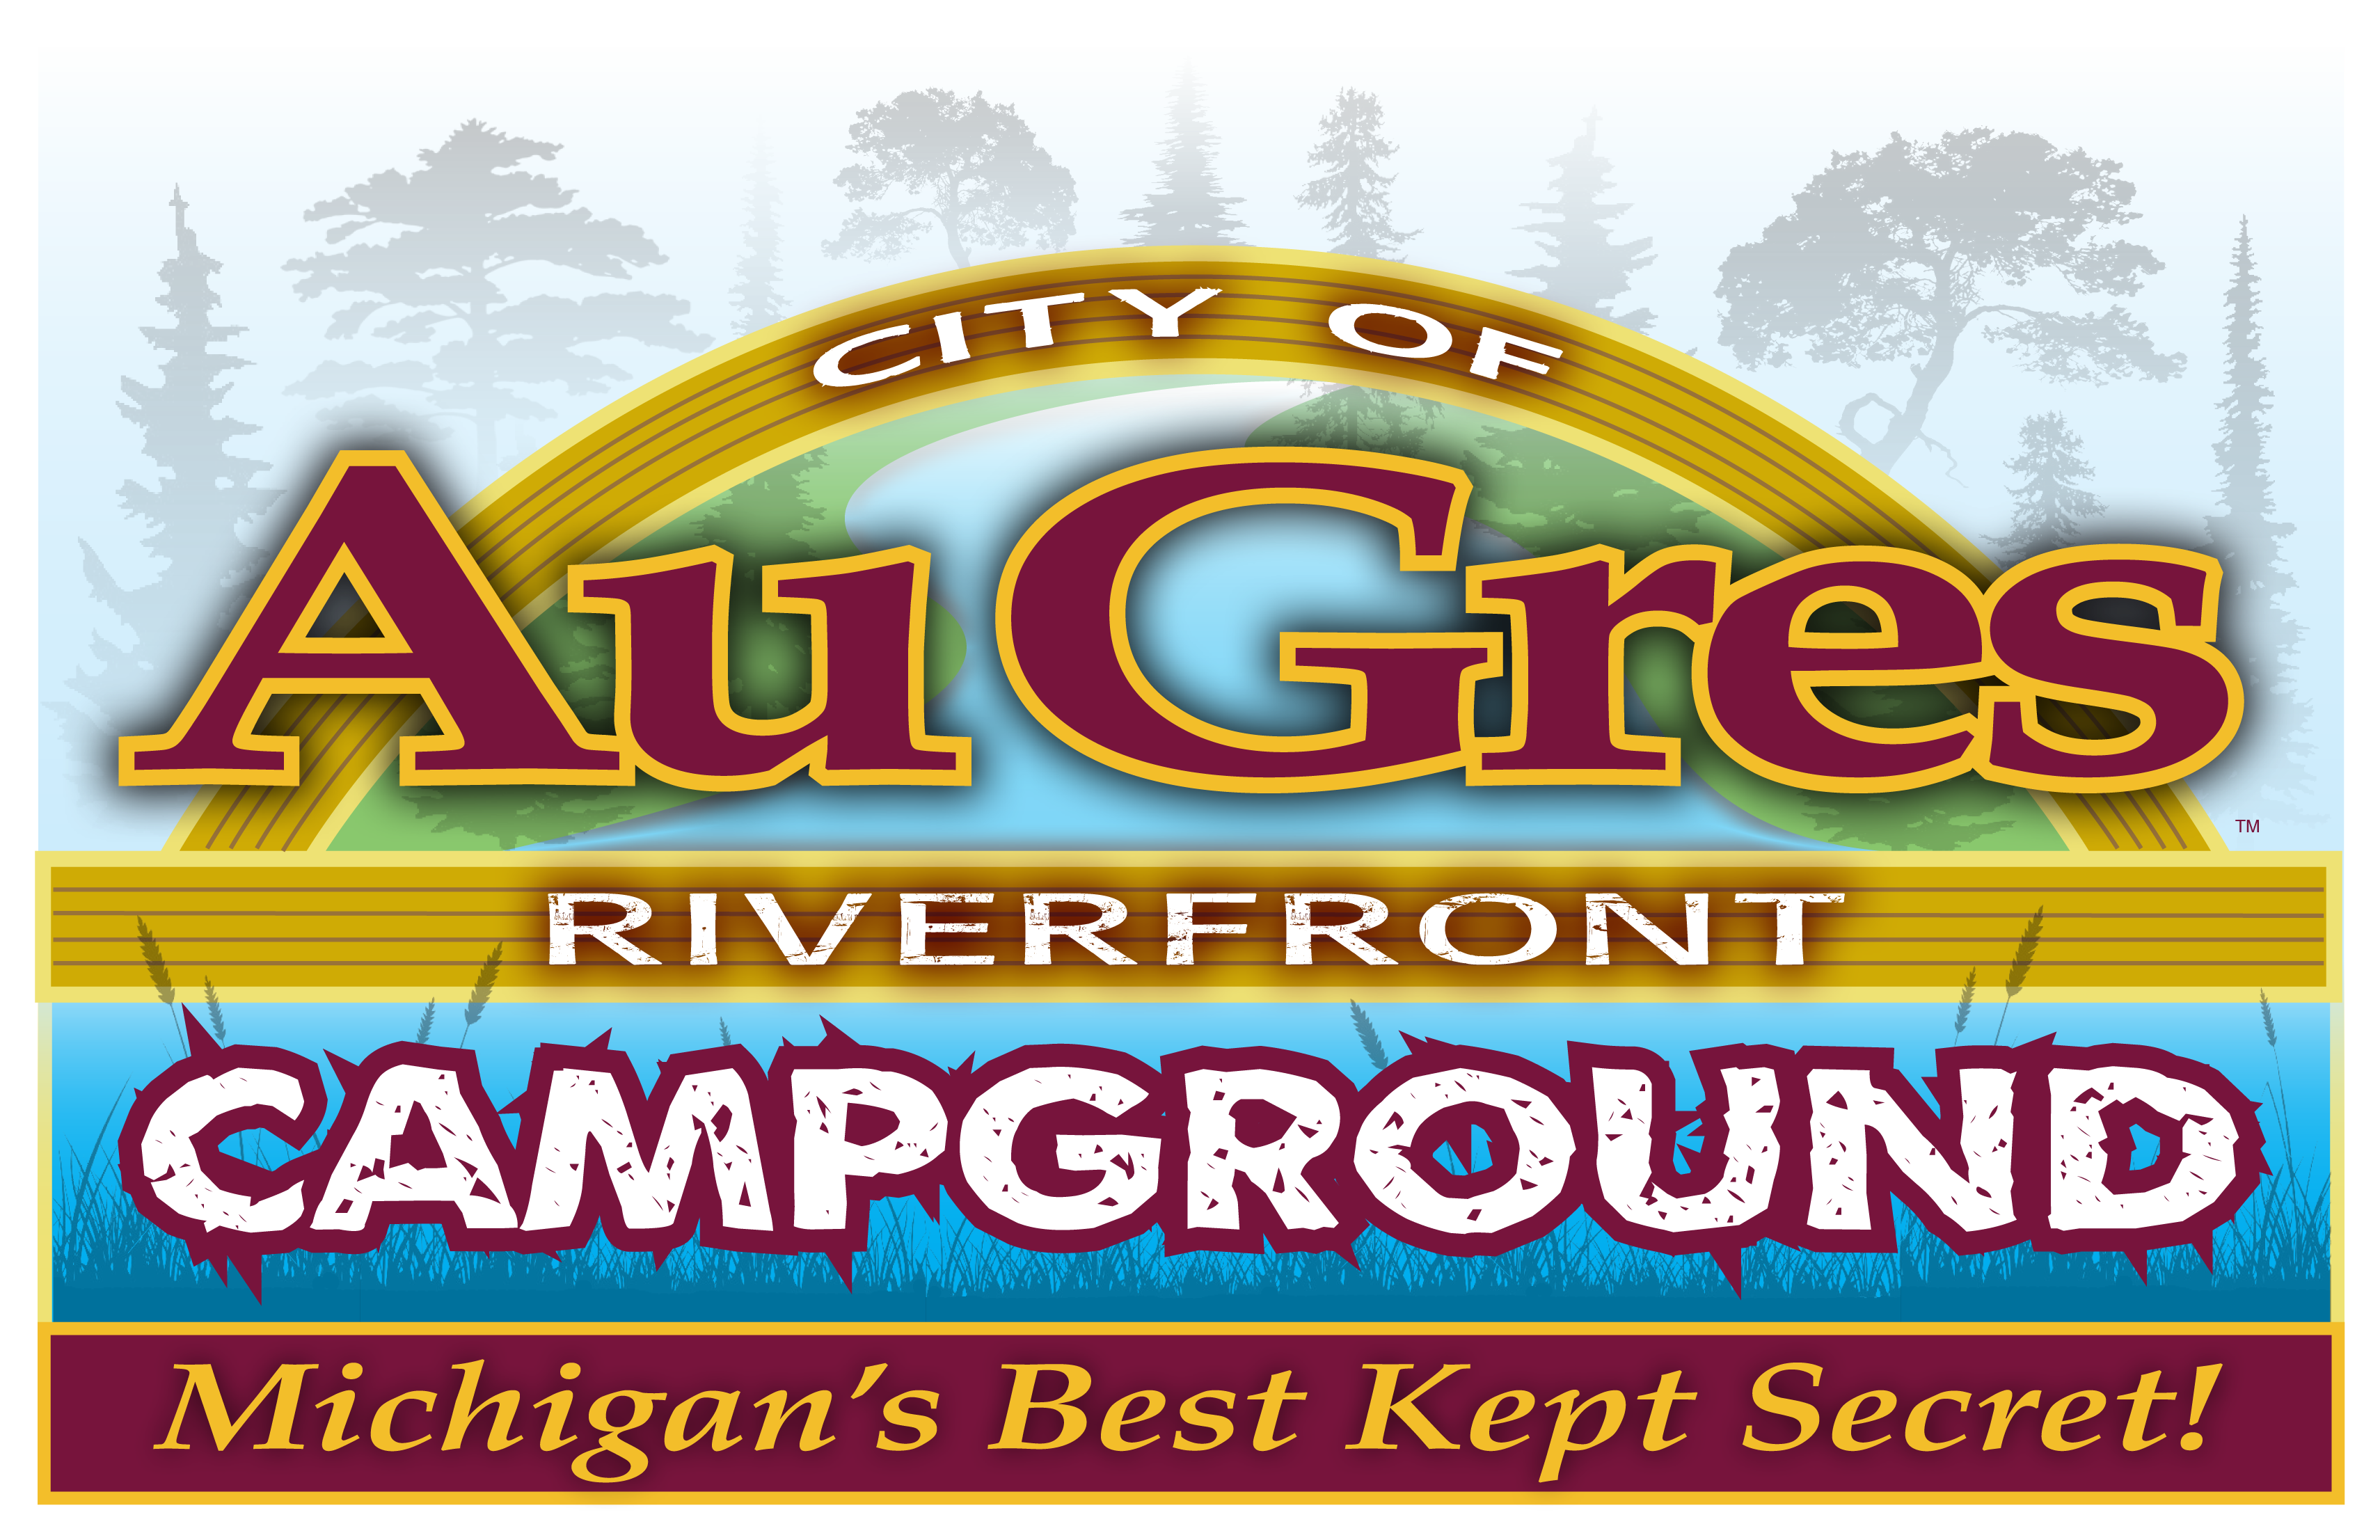 City of Au Gres Riverfront Campground